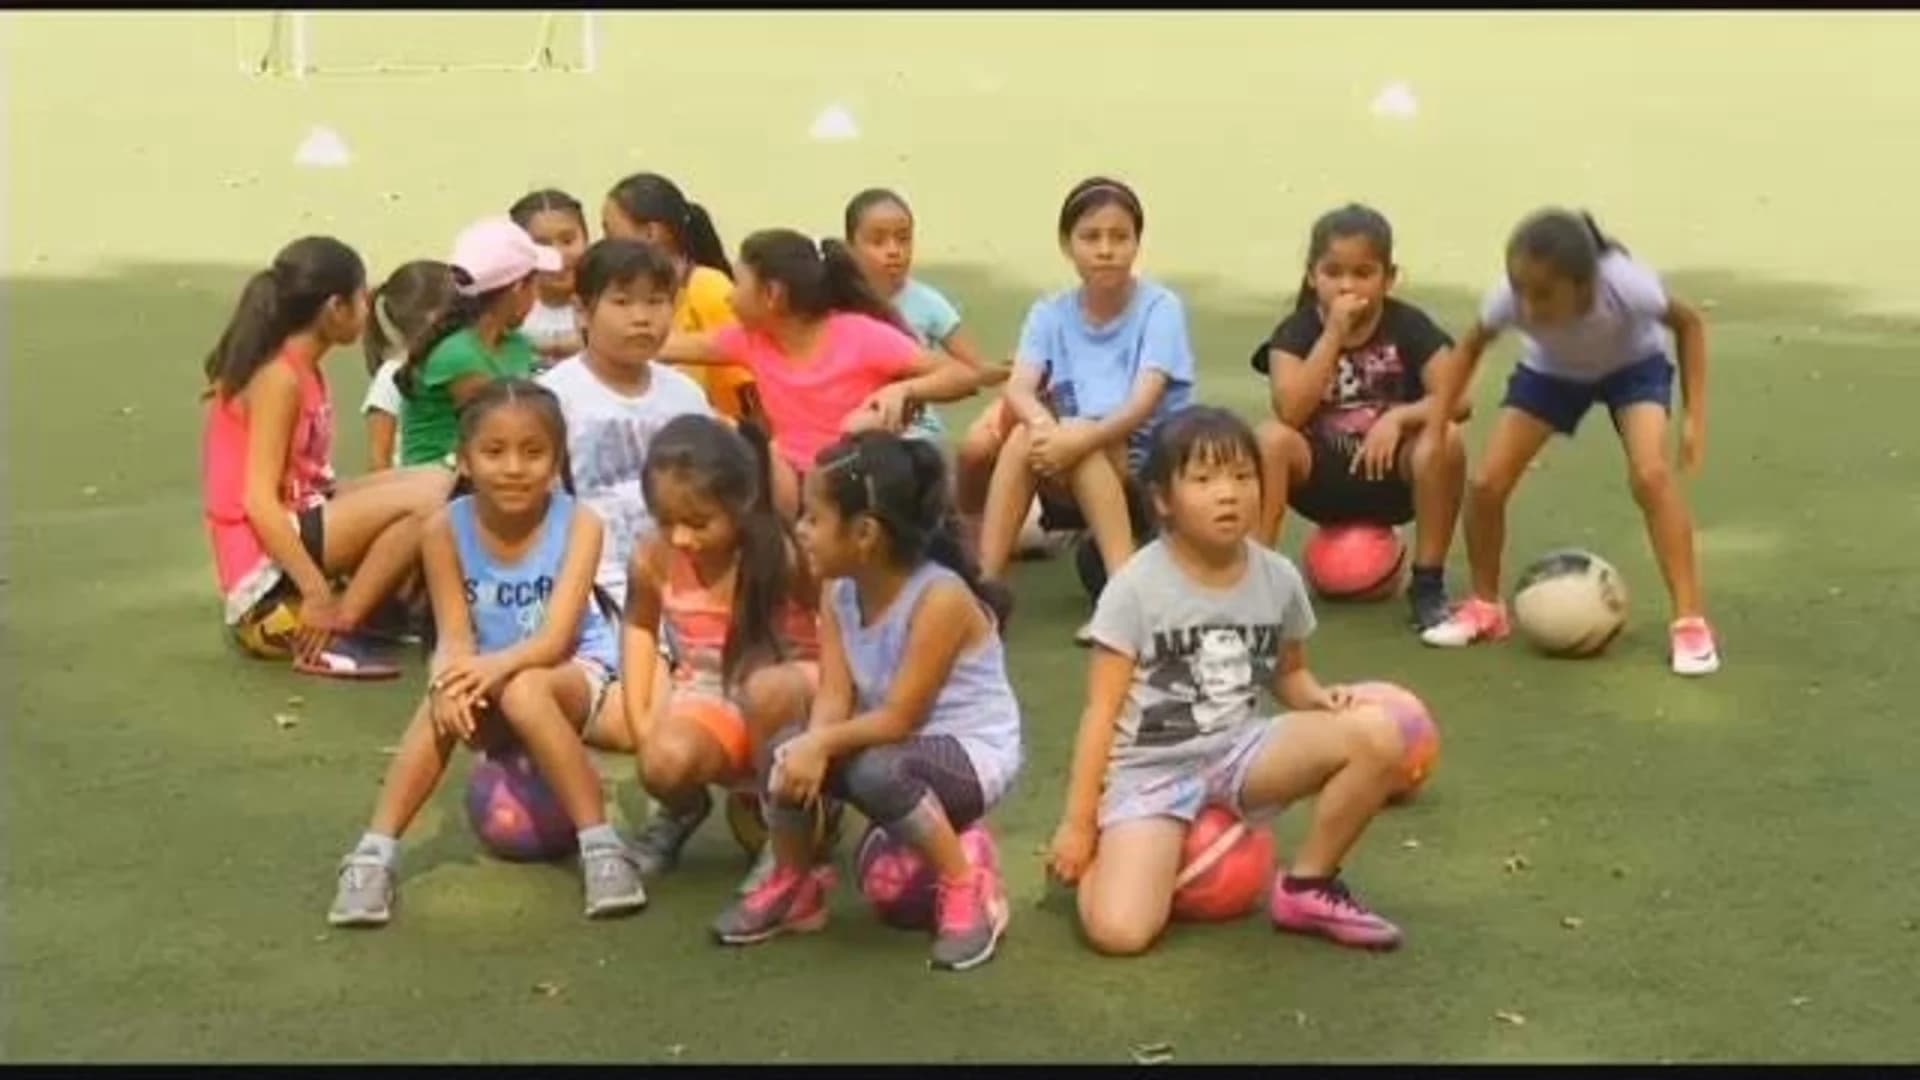 Girls soccer team kicked out of rec center over discrimination